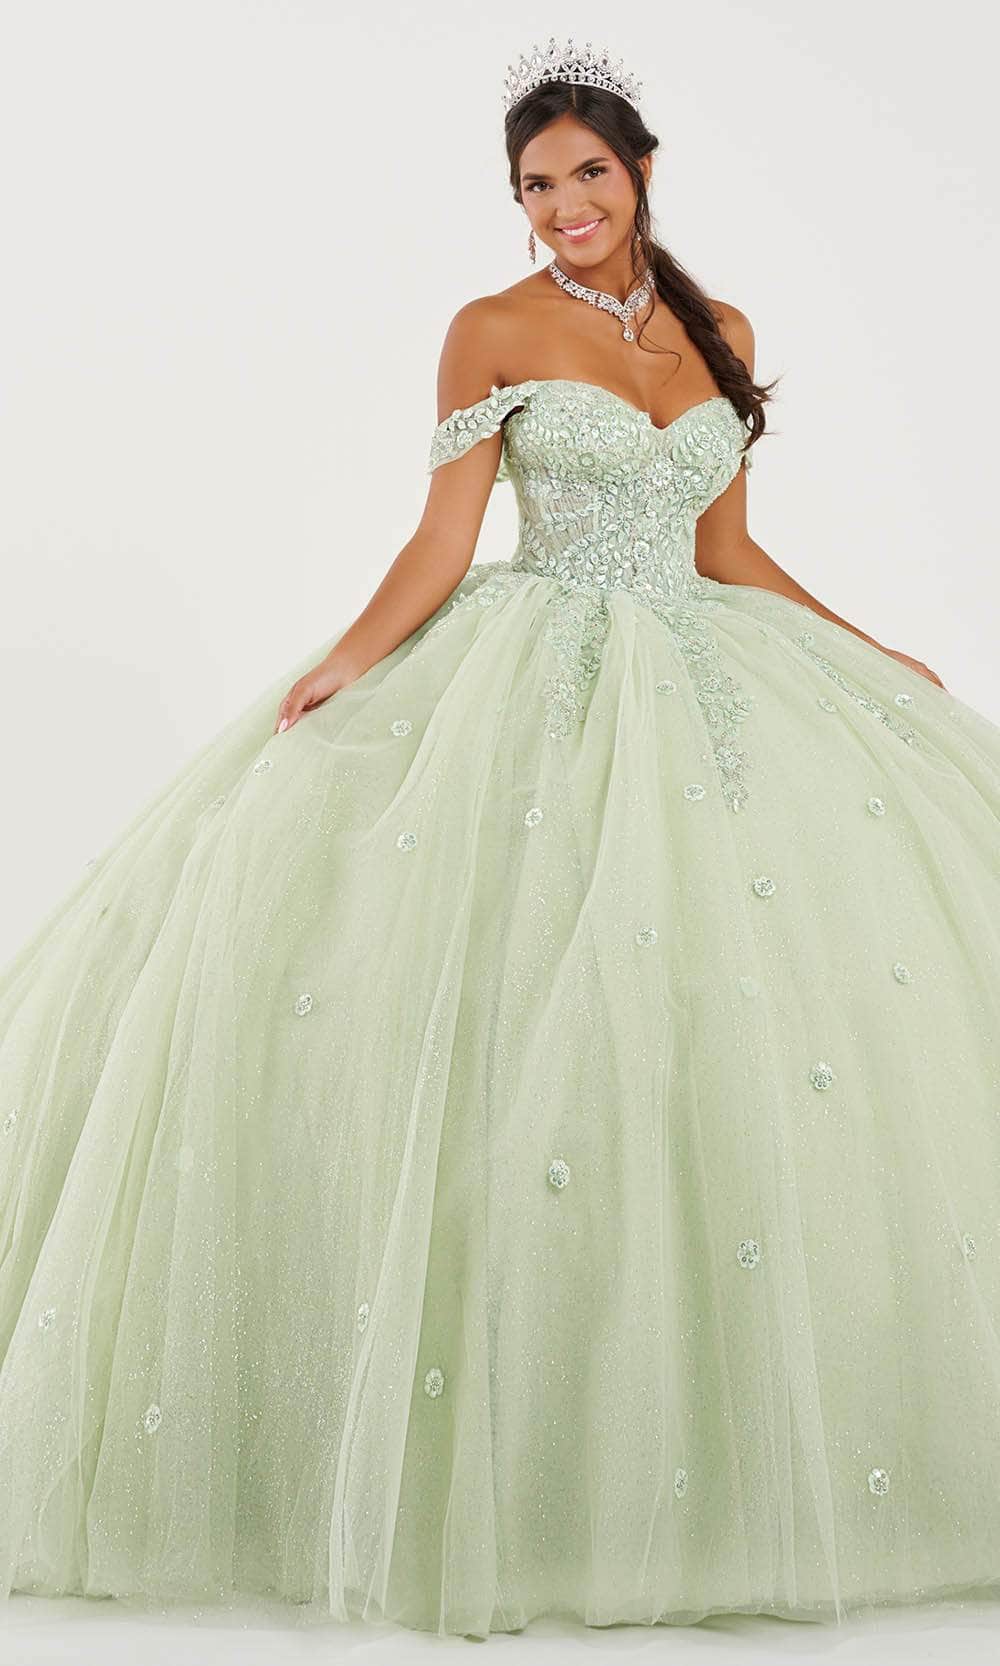 Image of Fiesta Gowns 56490 - 3D Beaded Off-Shoulder Ballgown